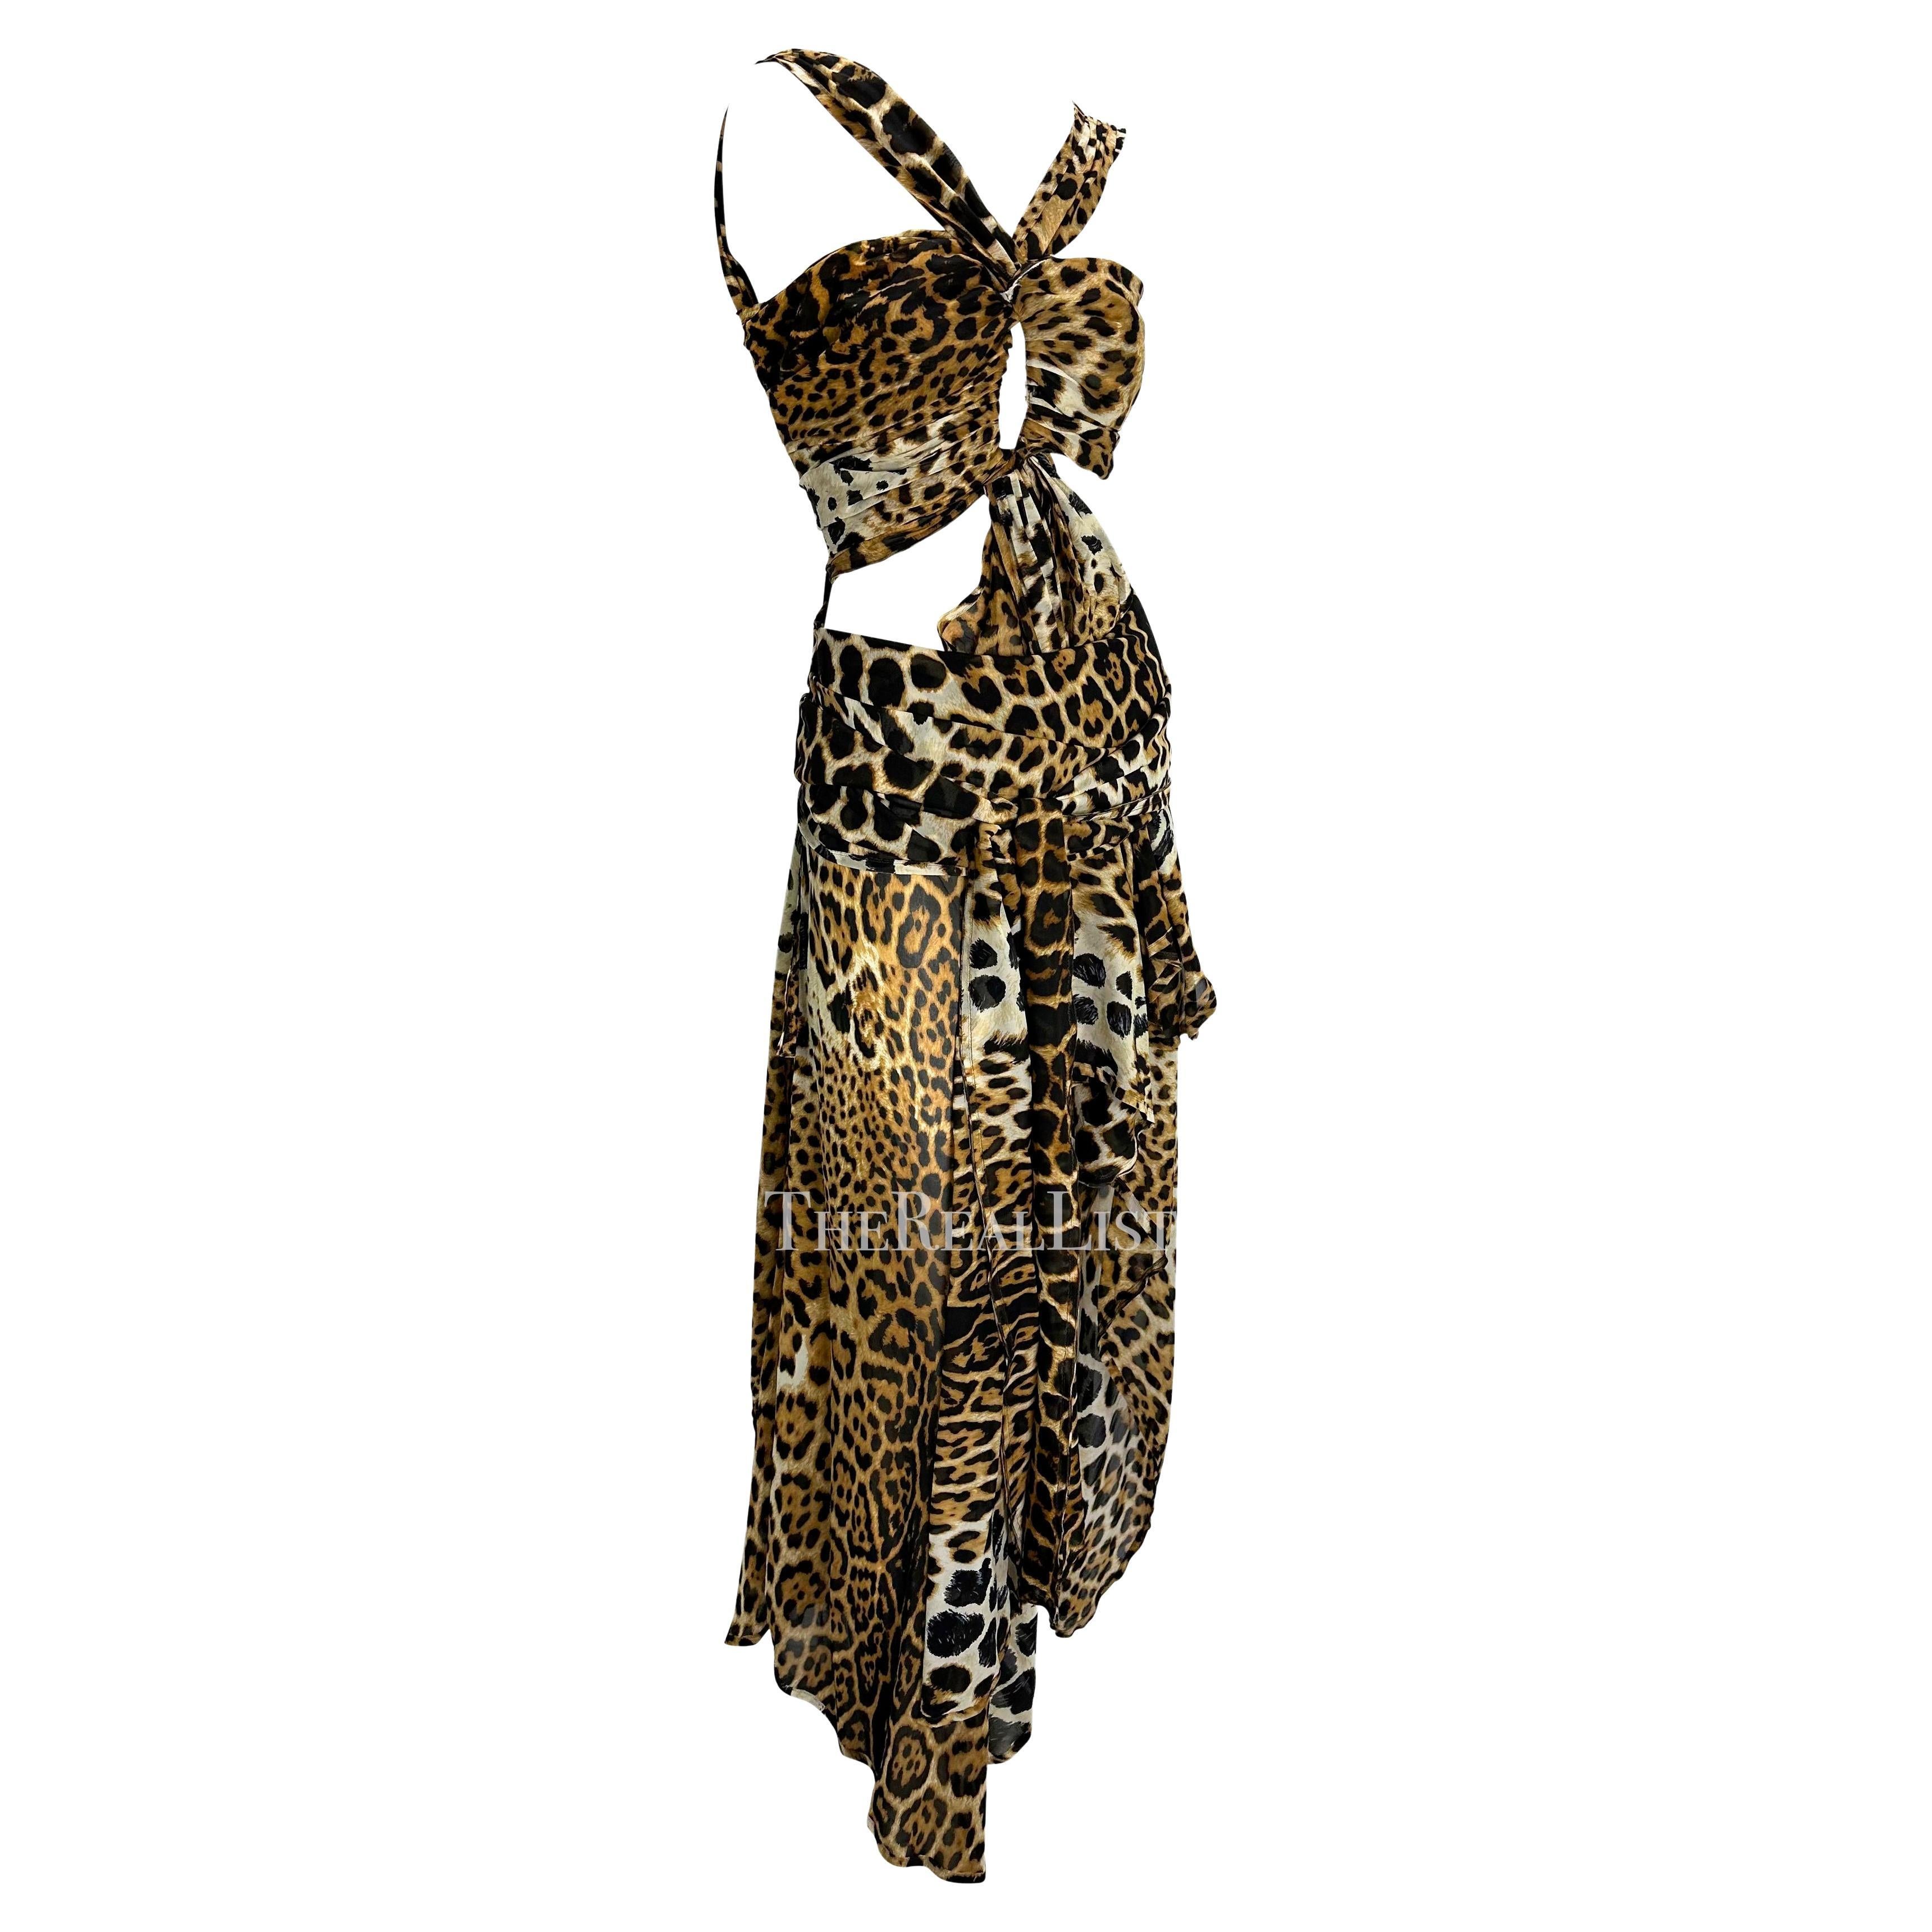 S/S 2002 Yves Saint Laurent by Tom Ford Runway Cheetah Print Chiffon Wrap Gown For Sale 12